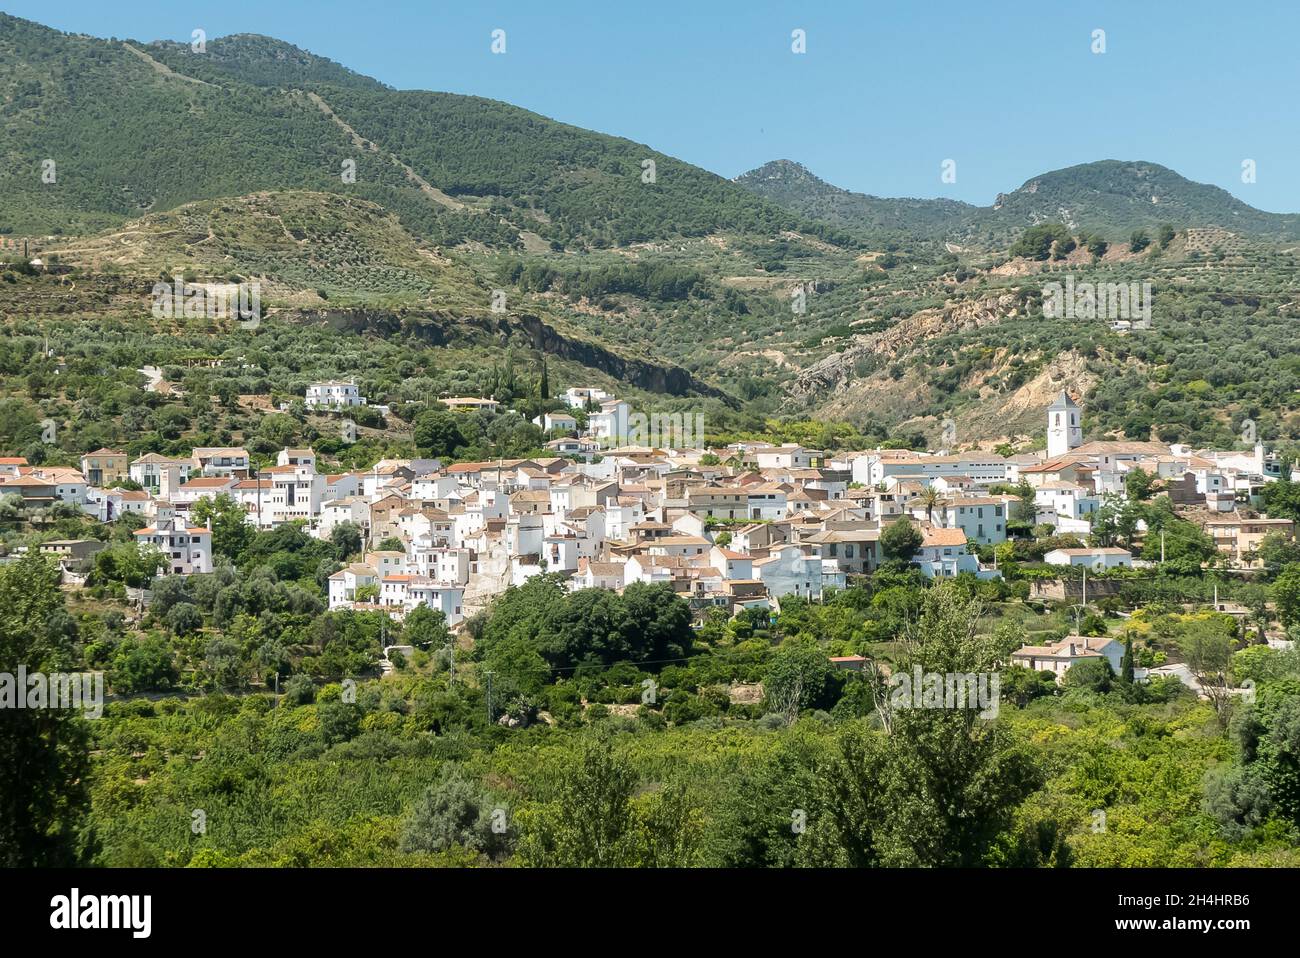 Granada in Spain: typical countryside around Restobal and the Valle de Lecrin Stock Photo